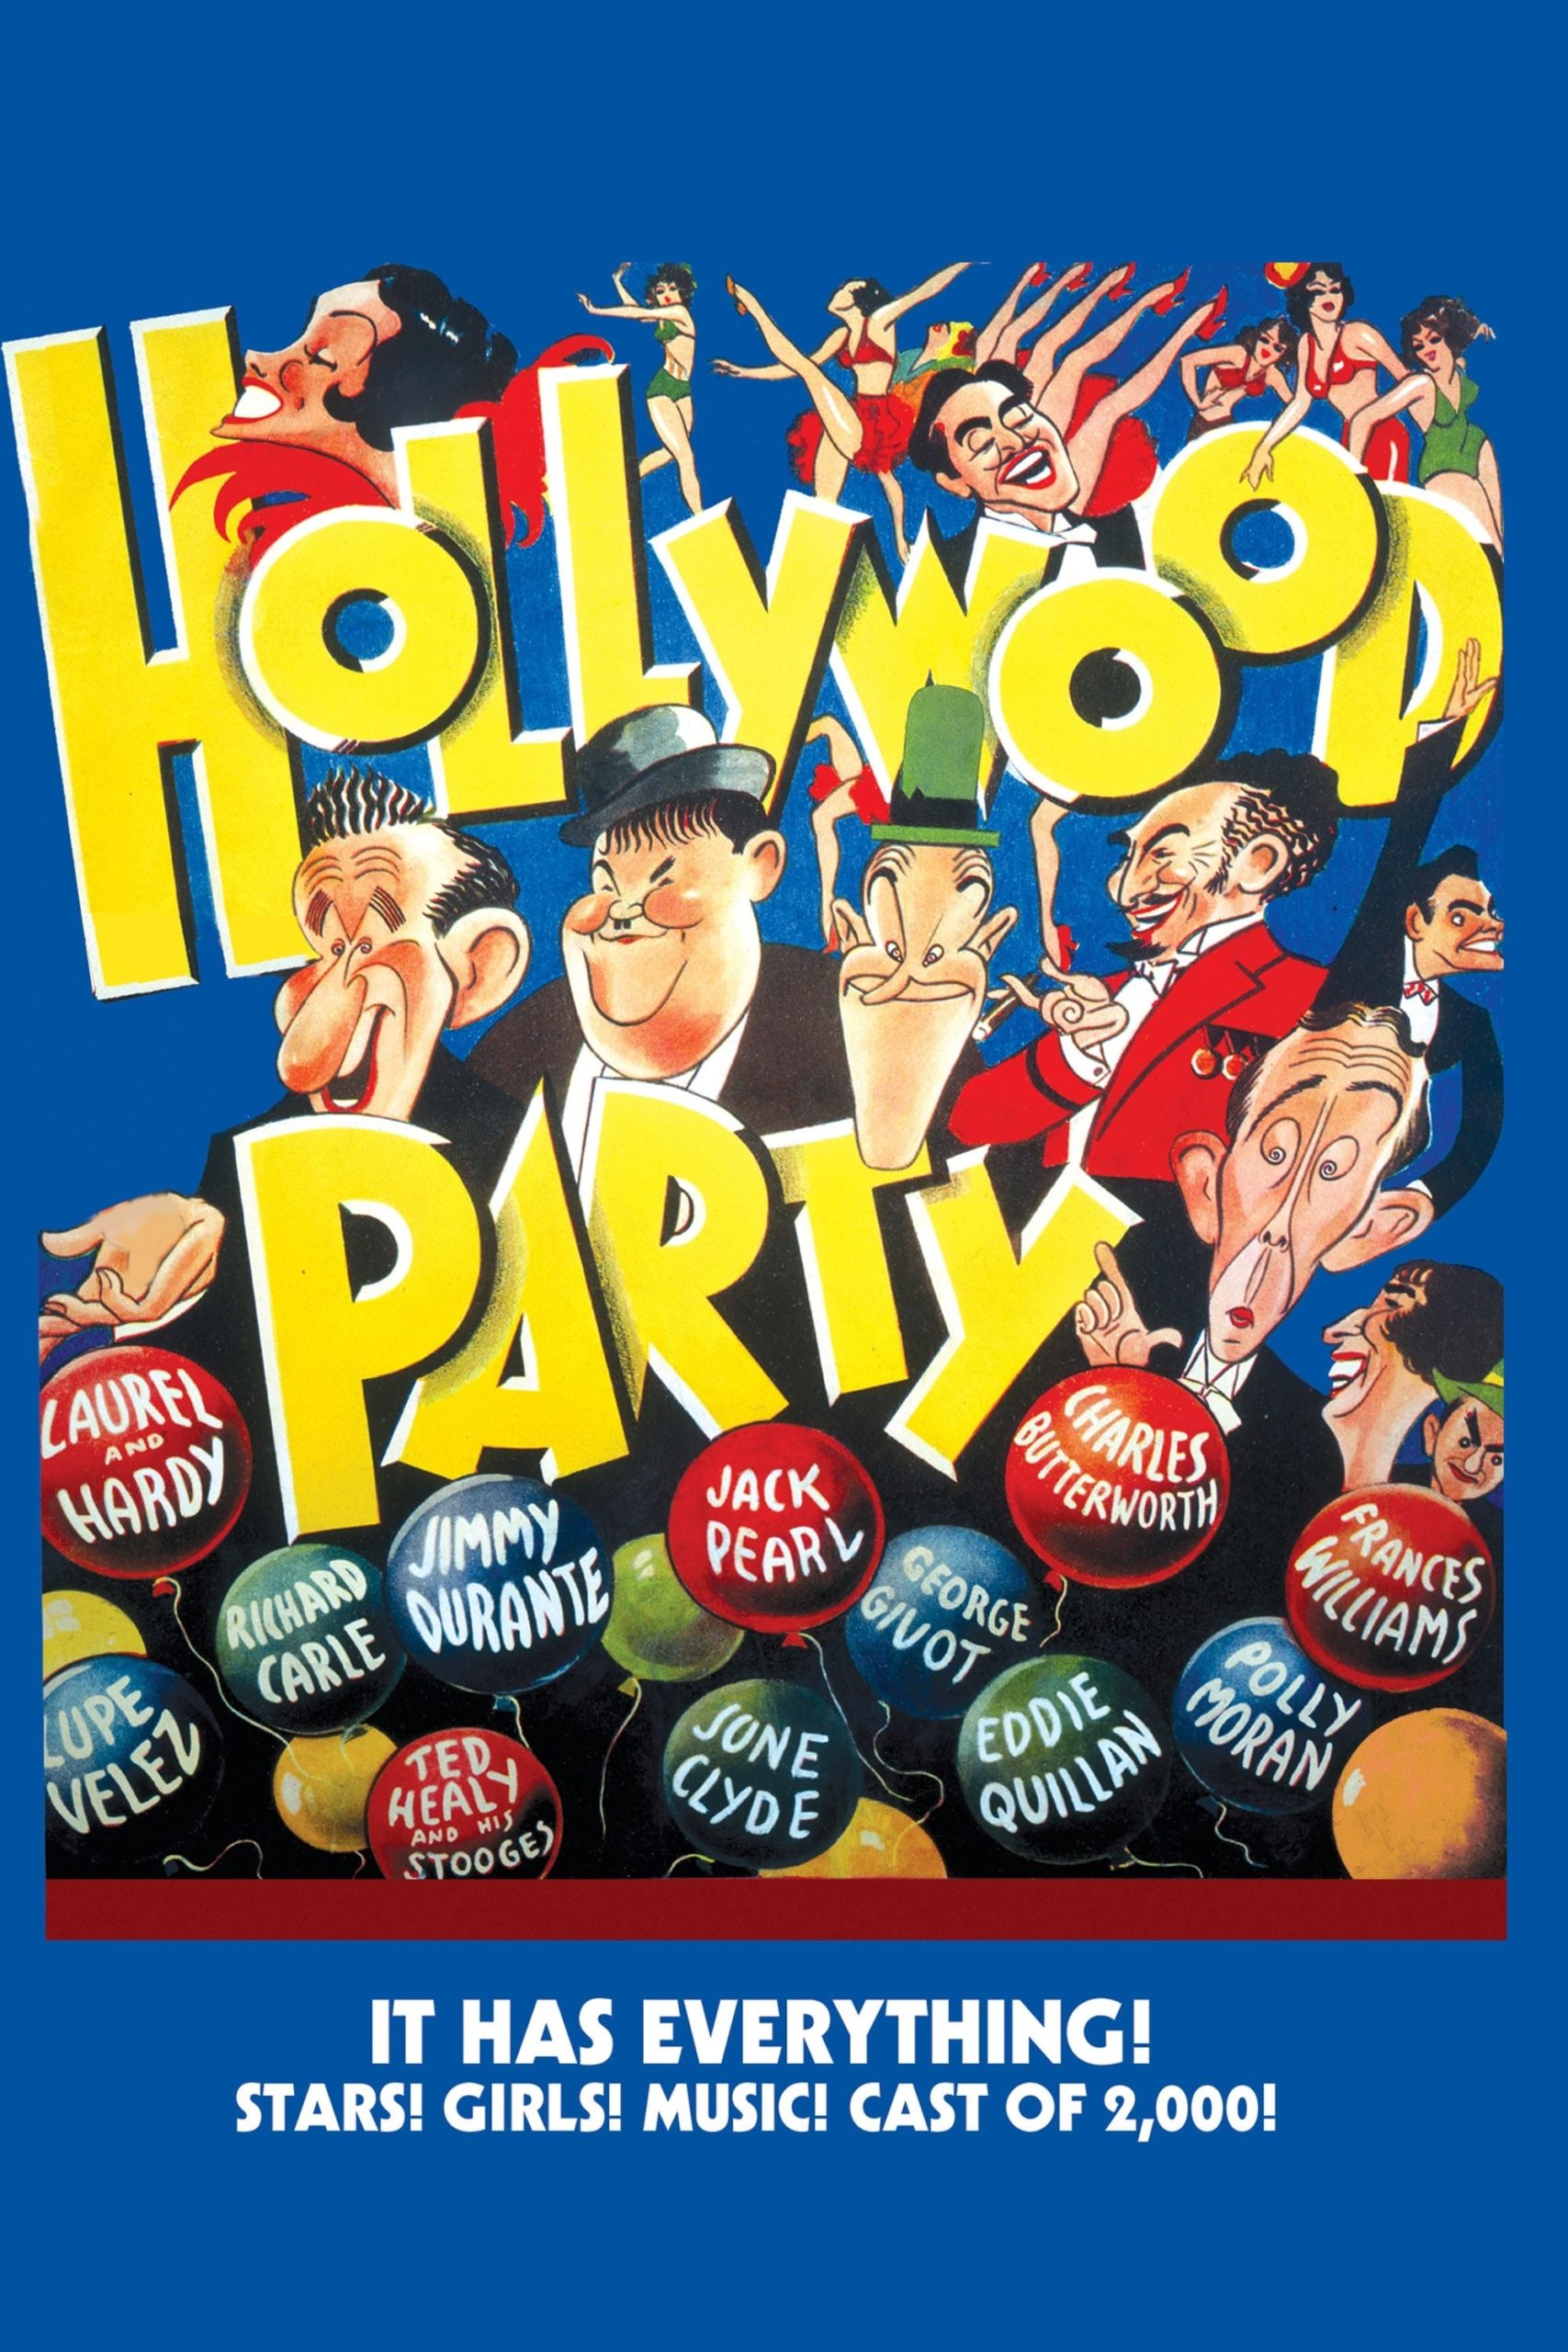 Poster for the movie "Hollywood Party"